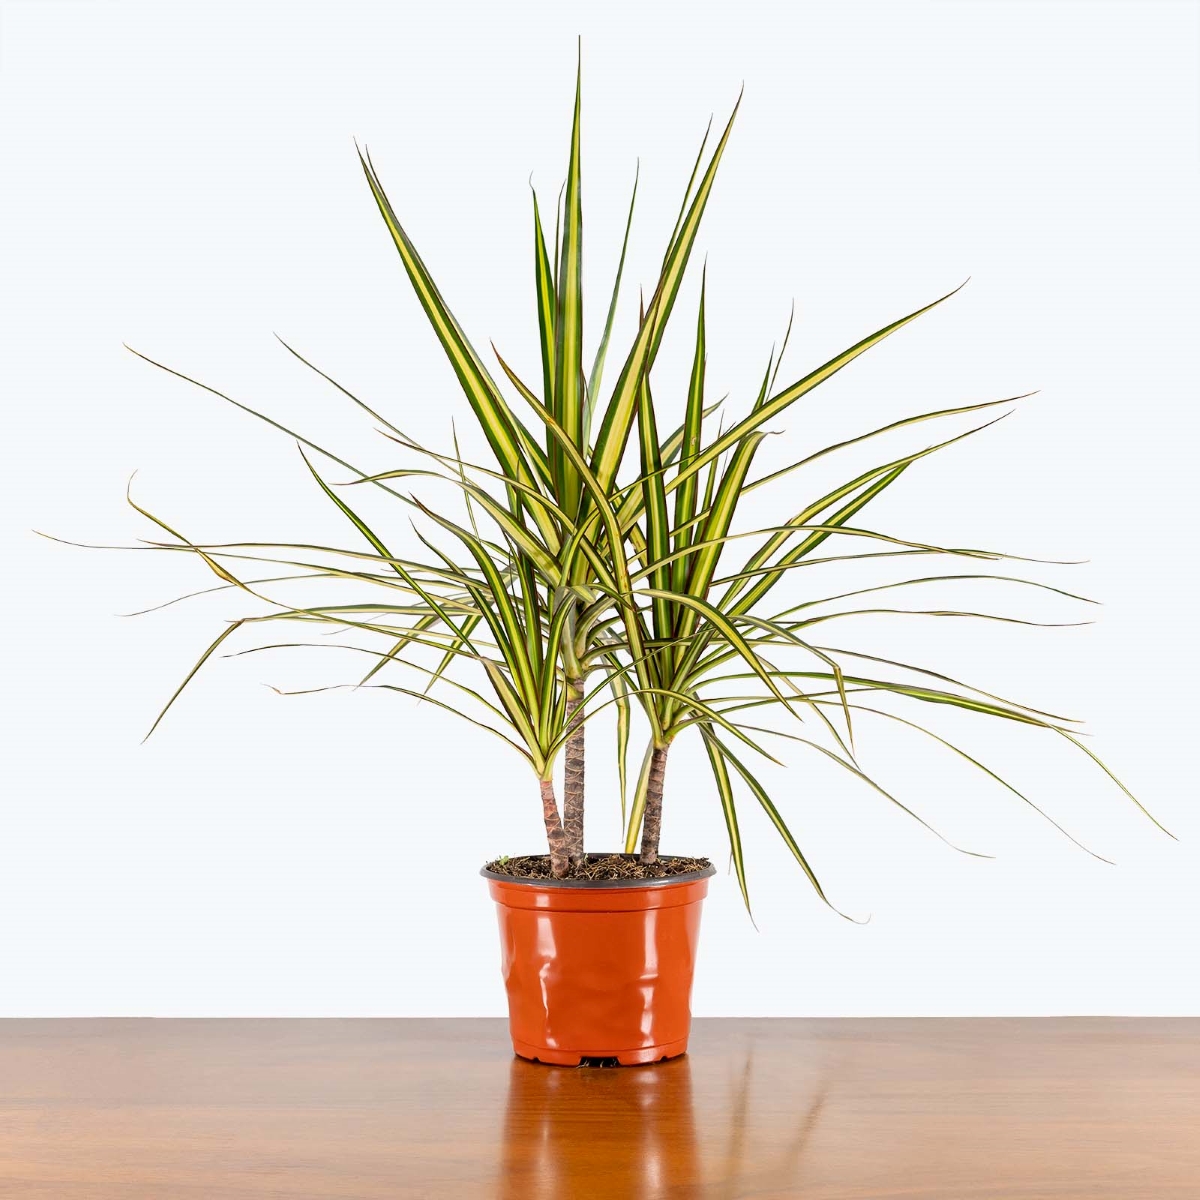 Dracaena plant with long thin spiky leaves